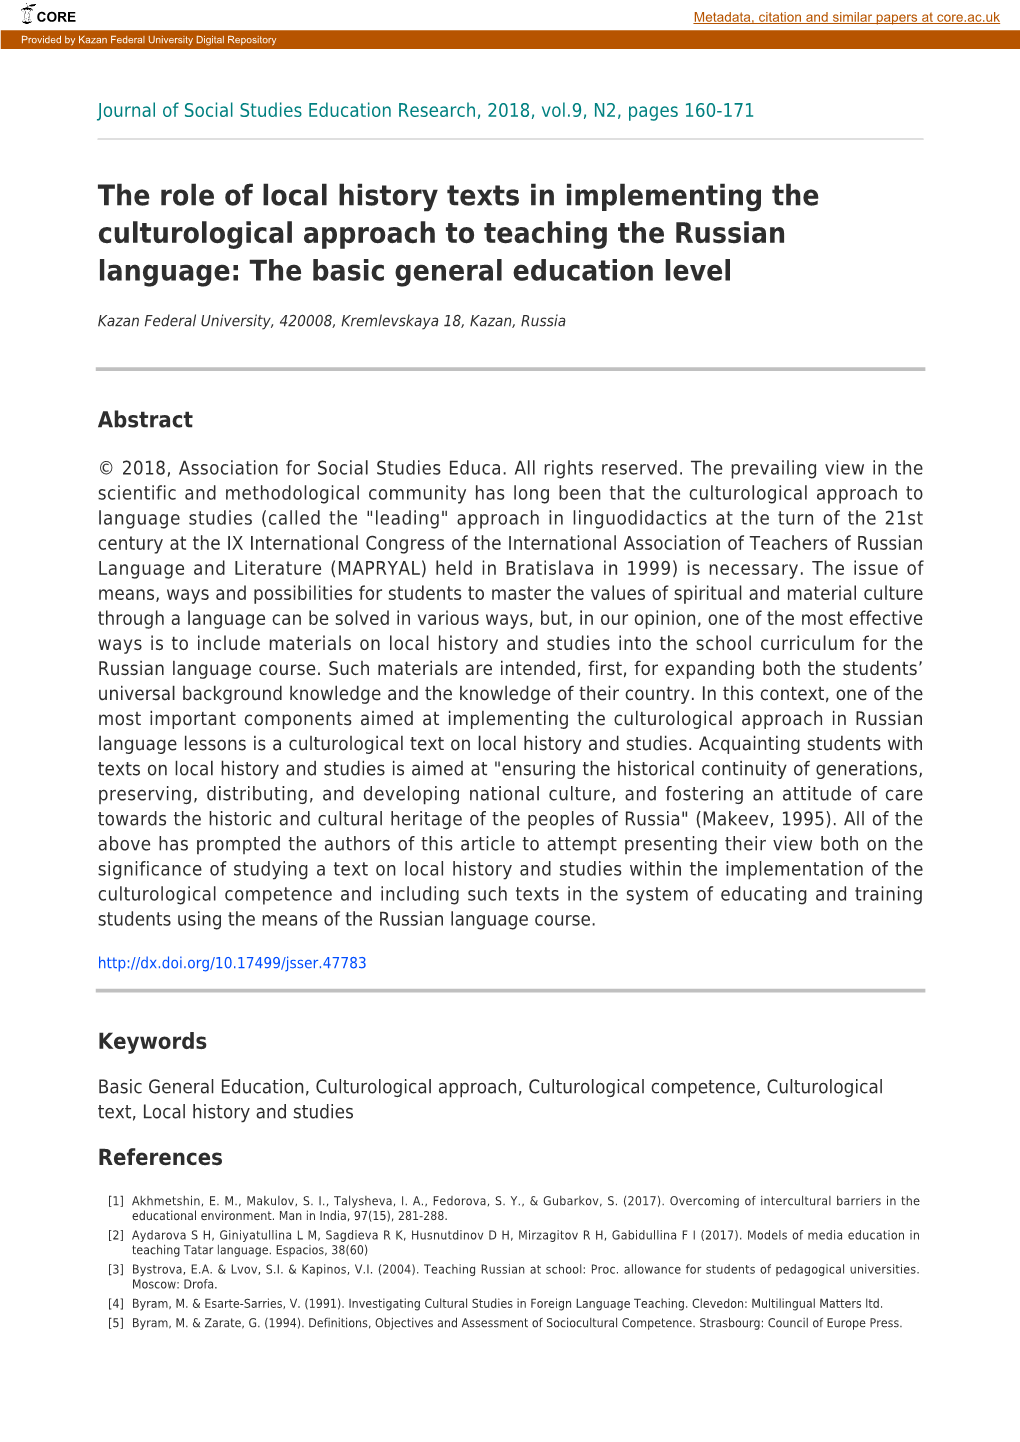 The Role of Local History Texts in Implementing the Culturological Approach to Teaching the Russian Language: the Basic General Education Level